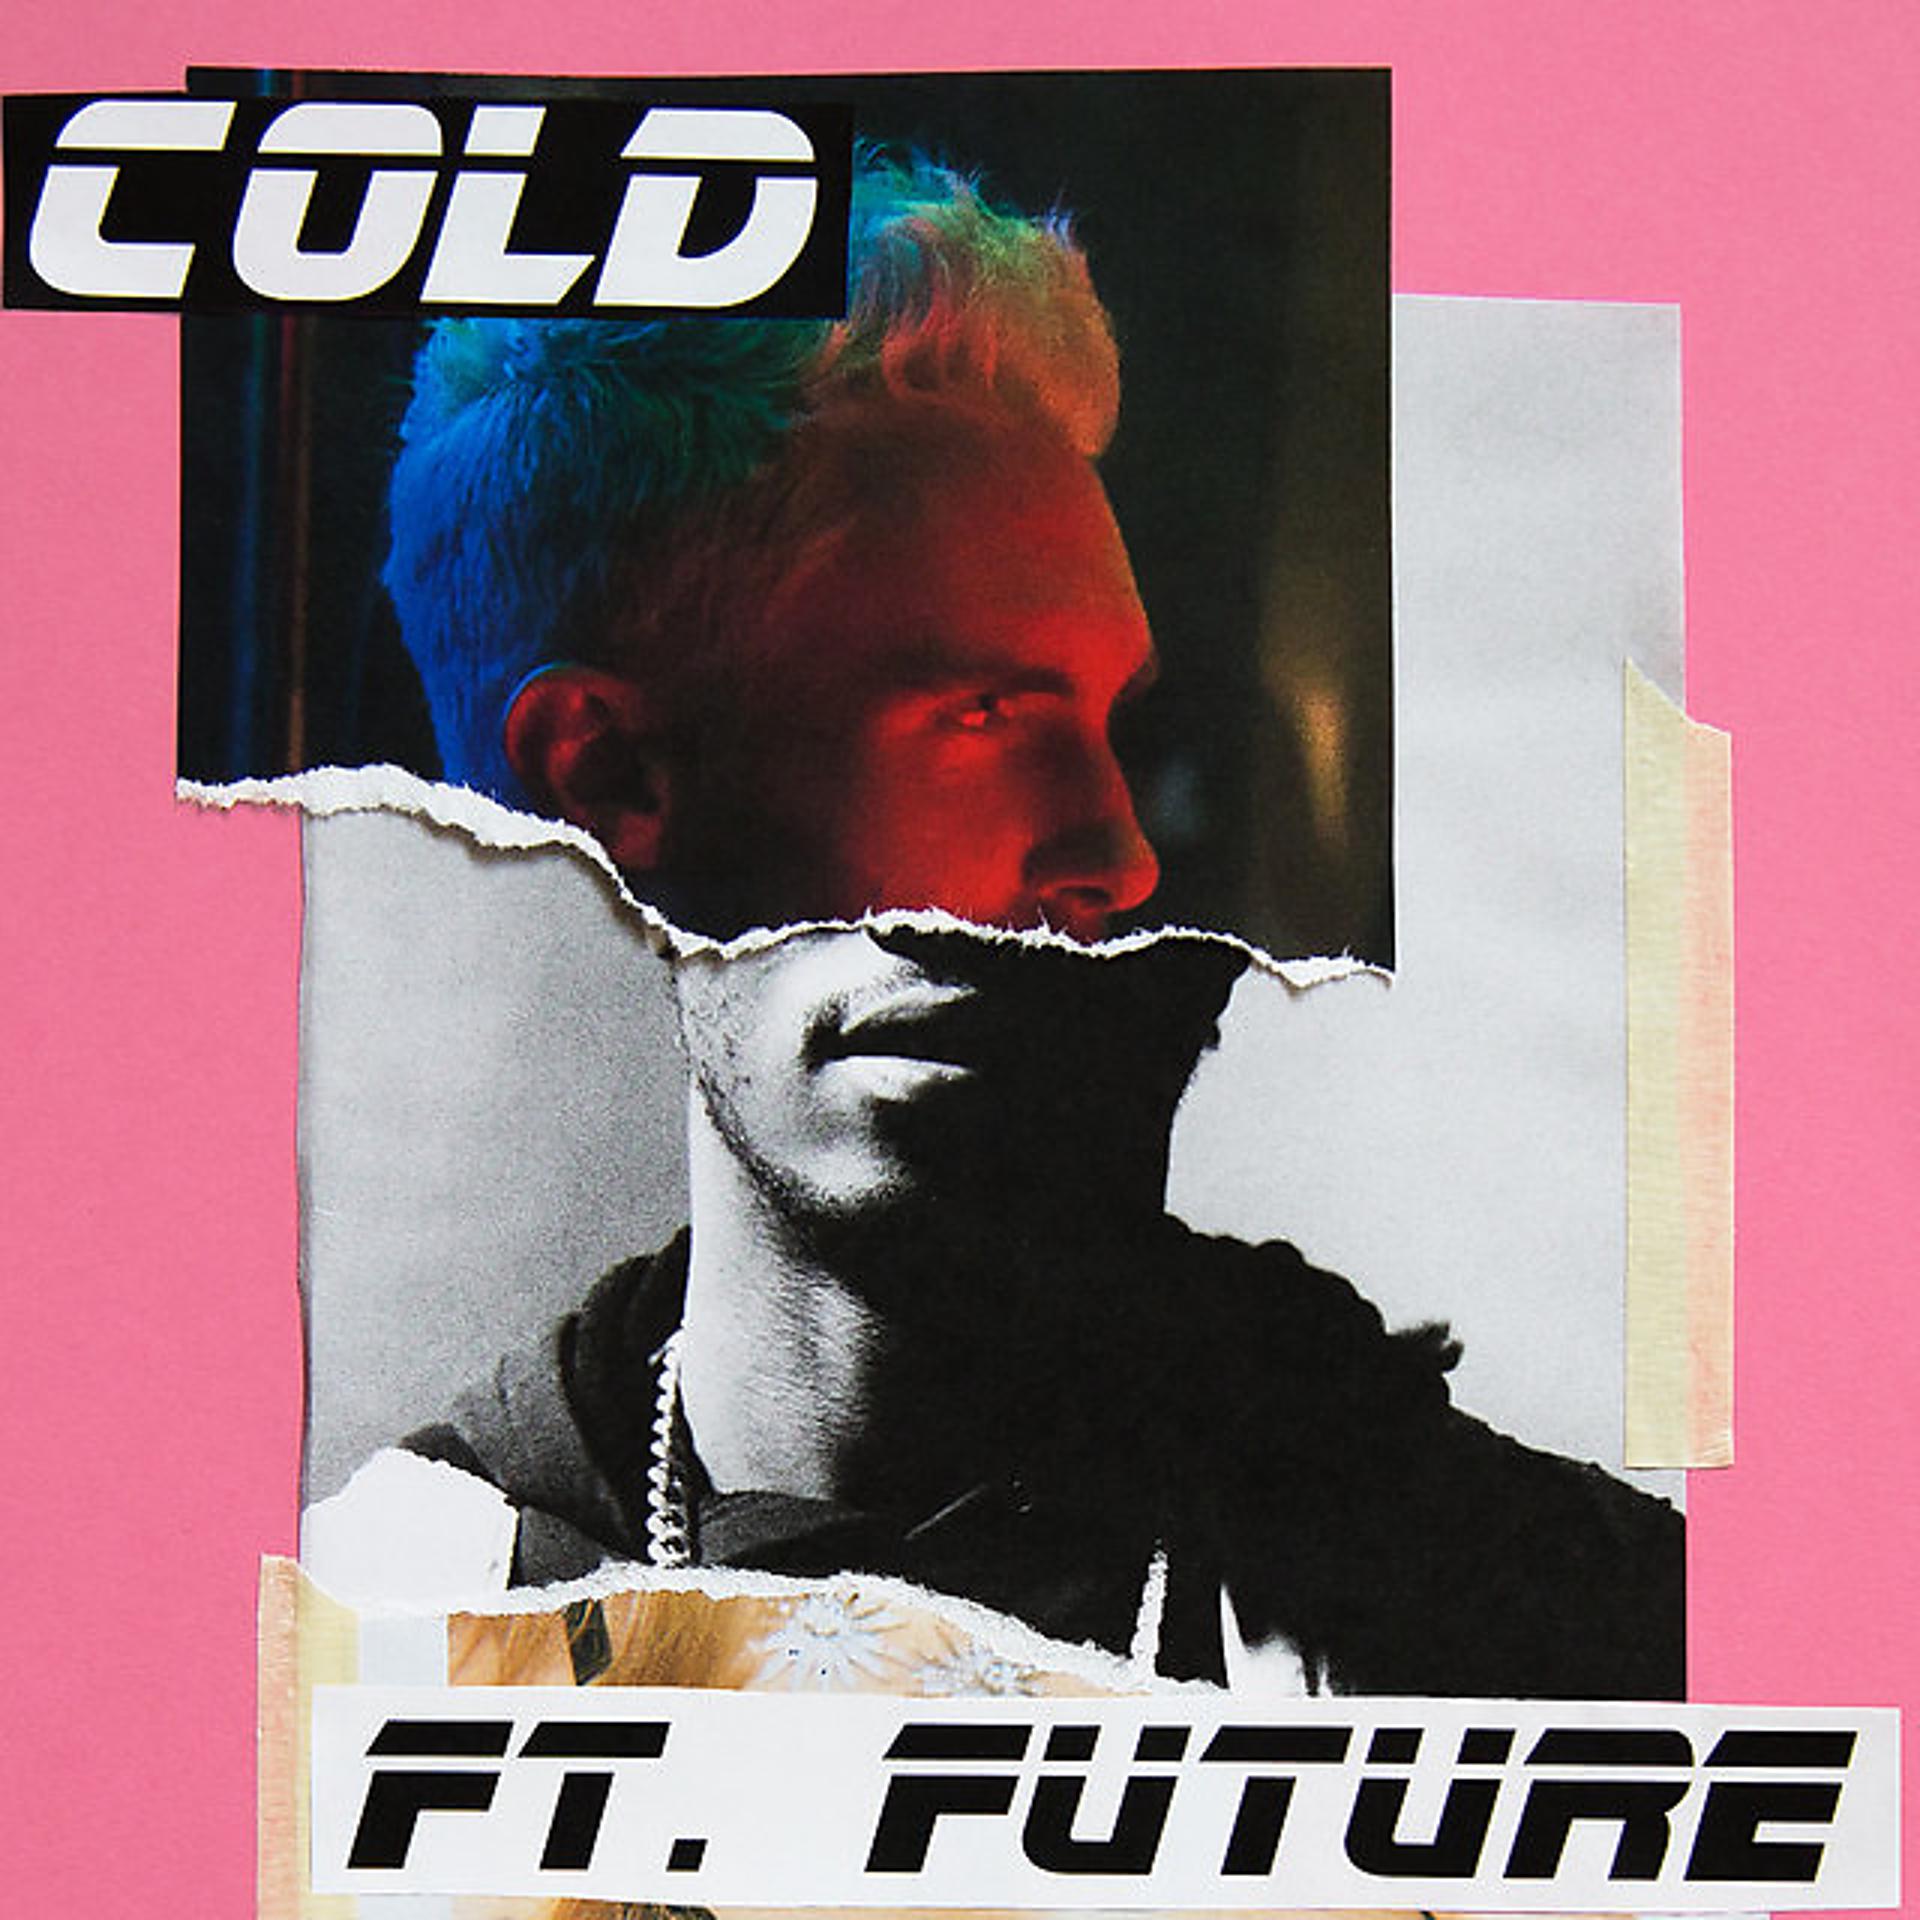 Cold Maroon 5. Maroon 5 feat. Future - Cold. No Rap Version. Maroon 5 ft Future Cold Reverb.